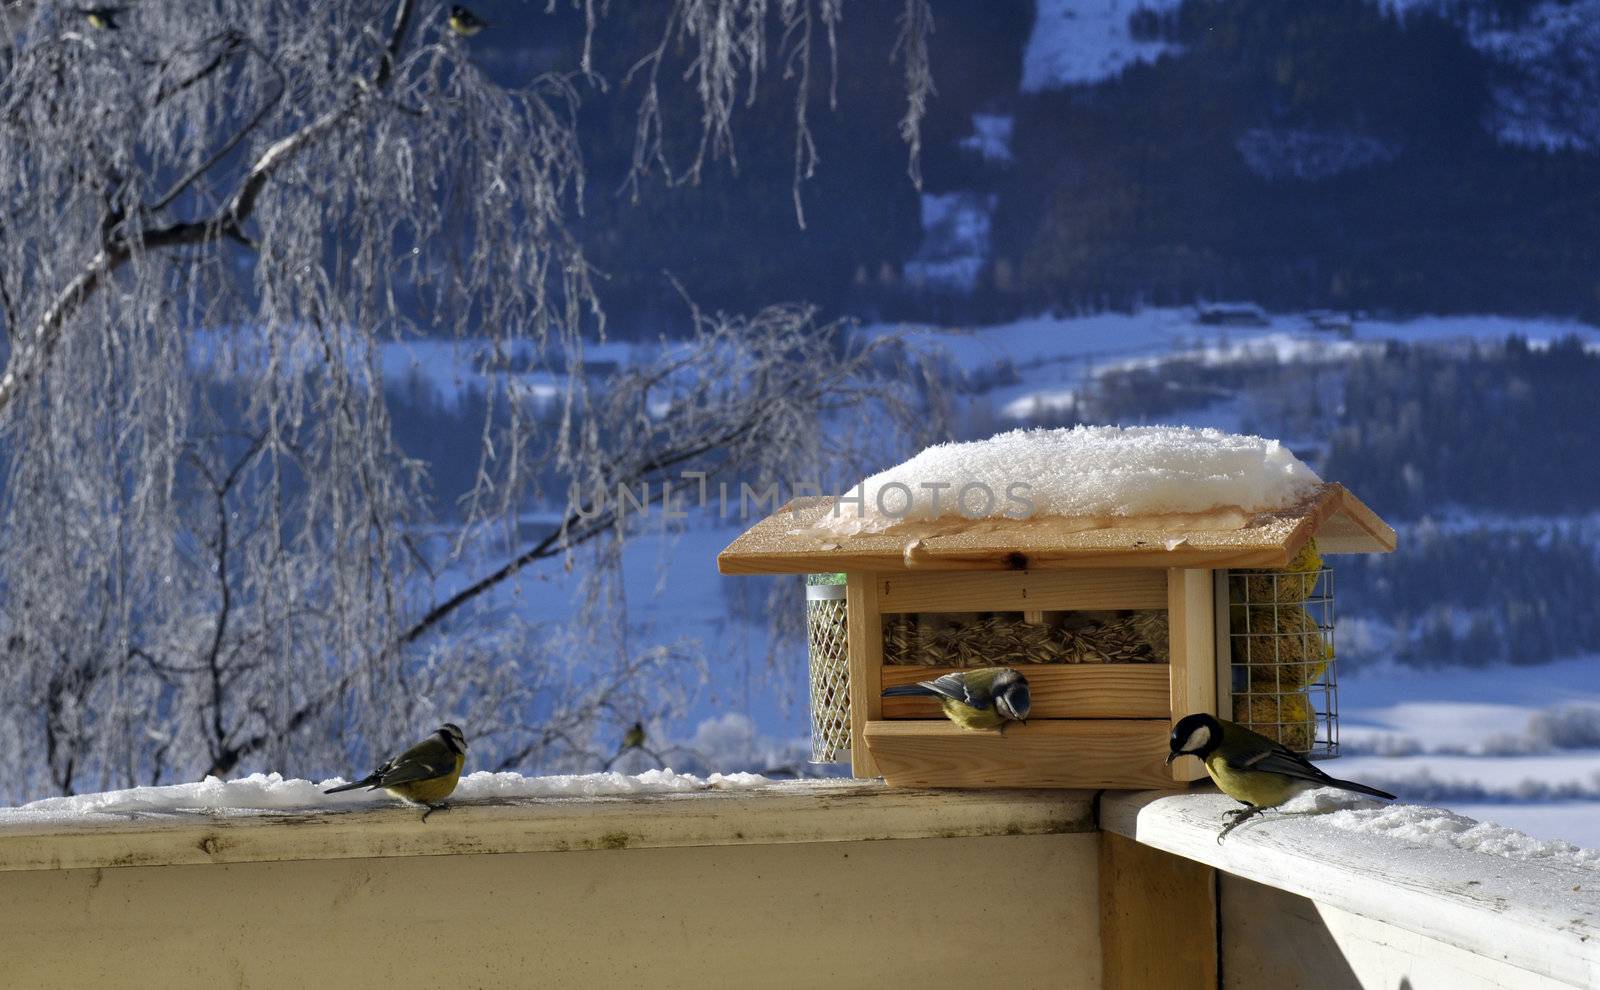 a couple of birds is eating from a feeder automat